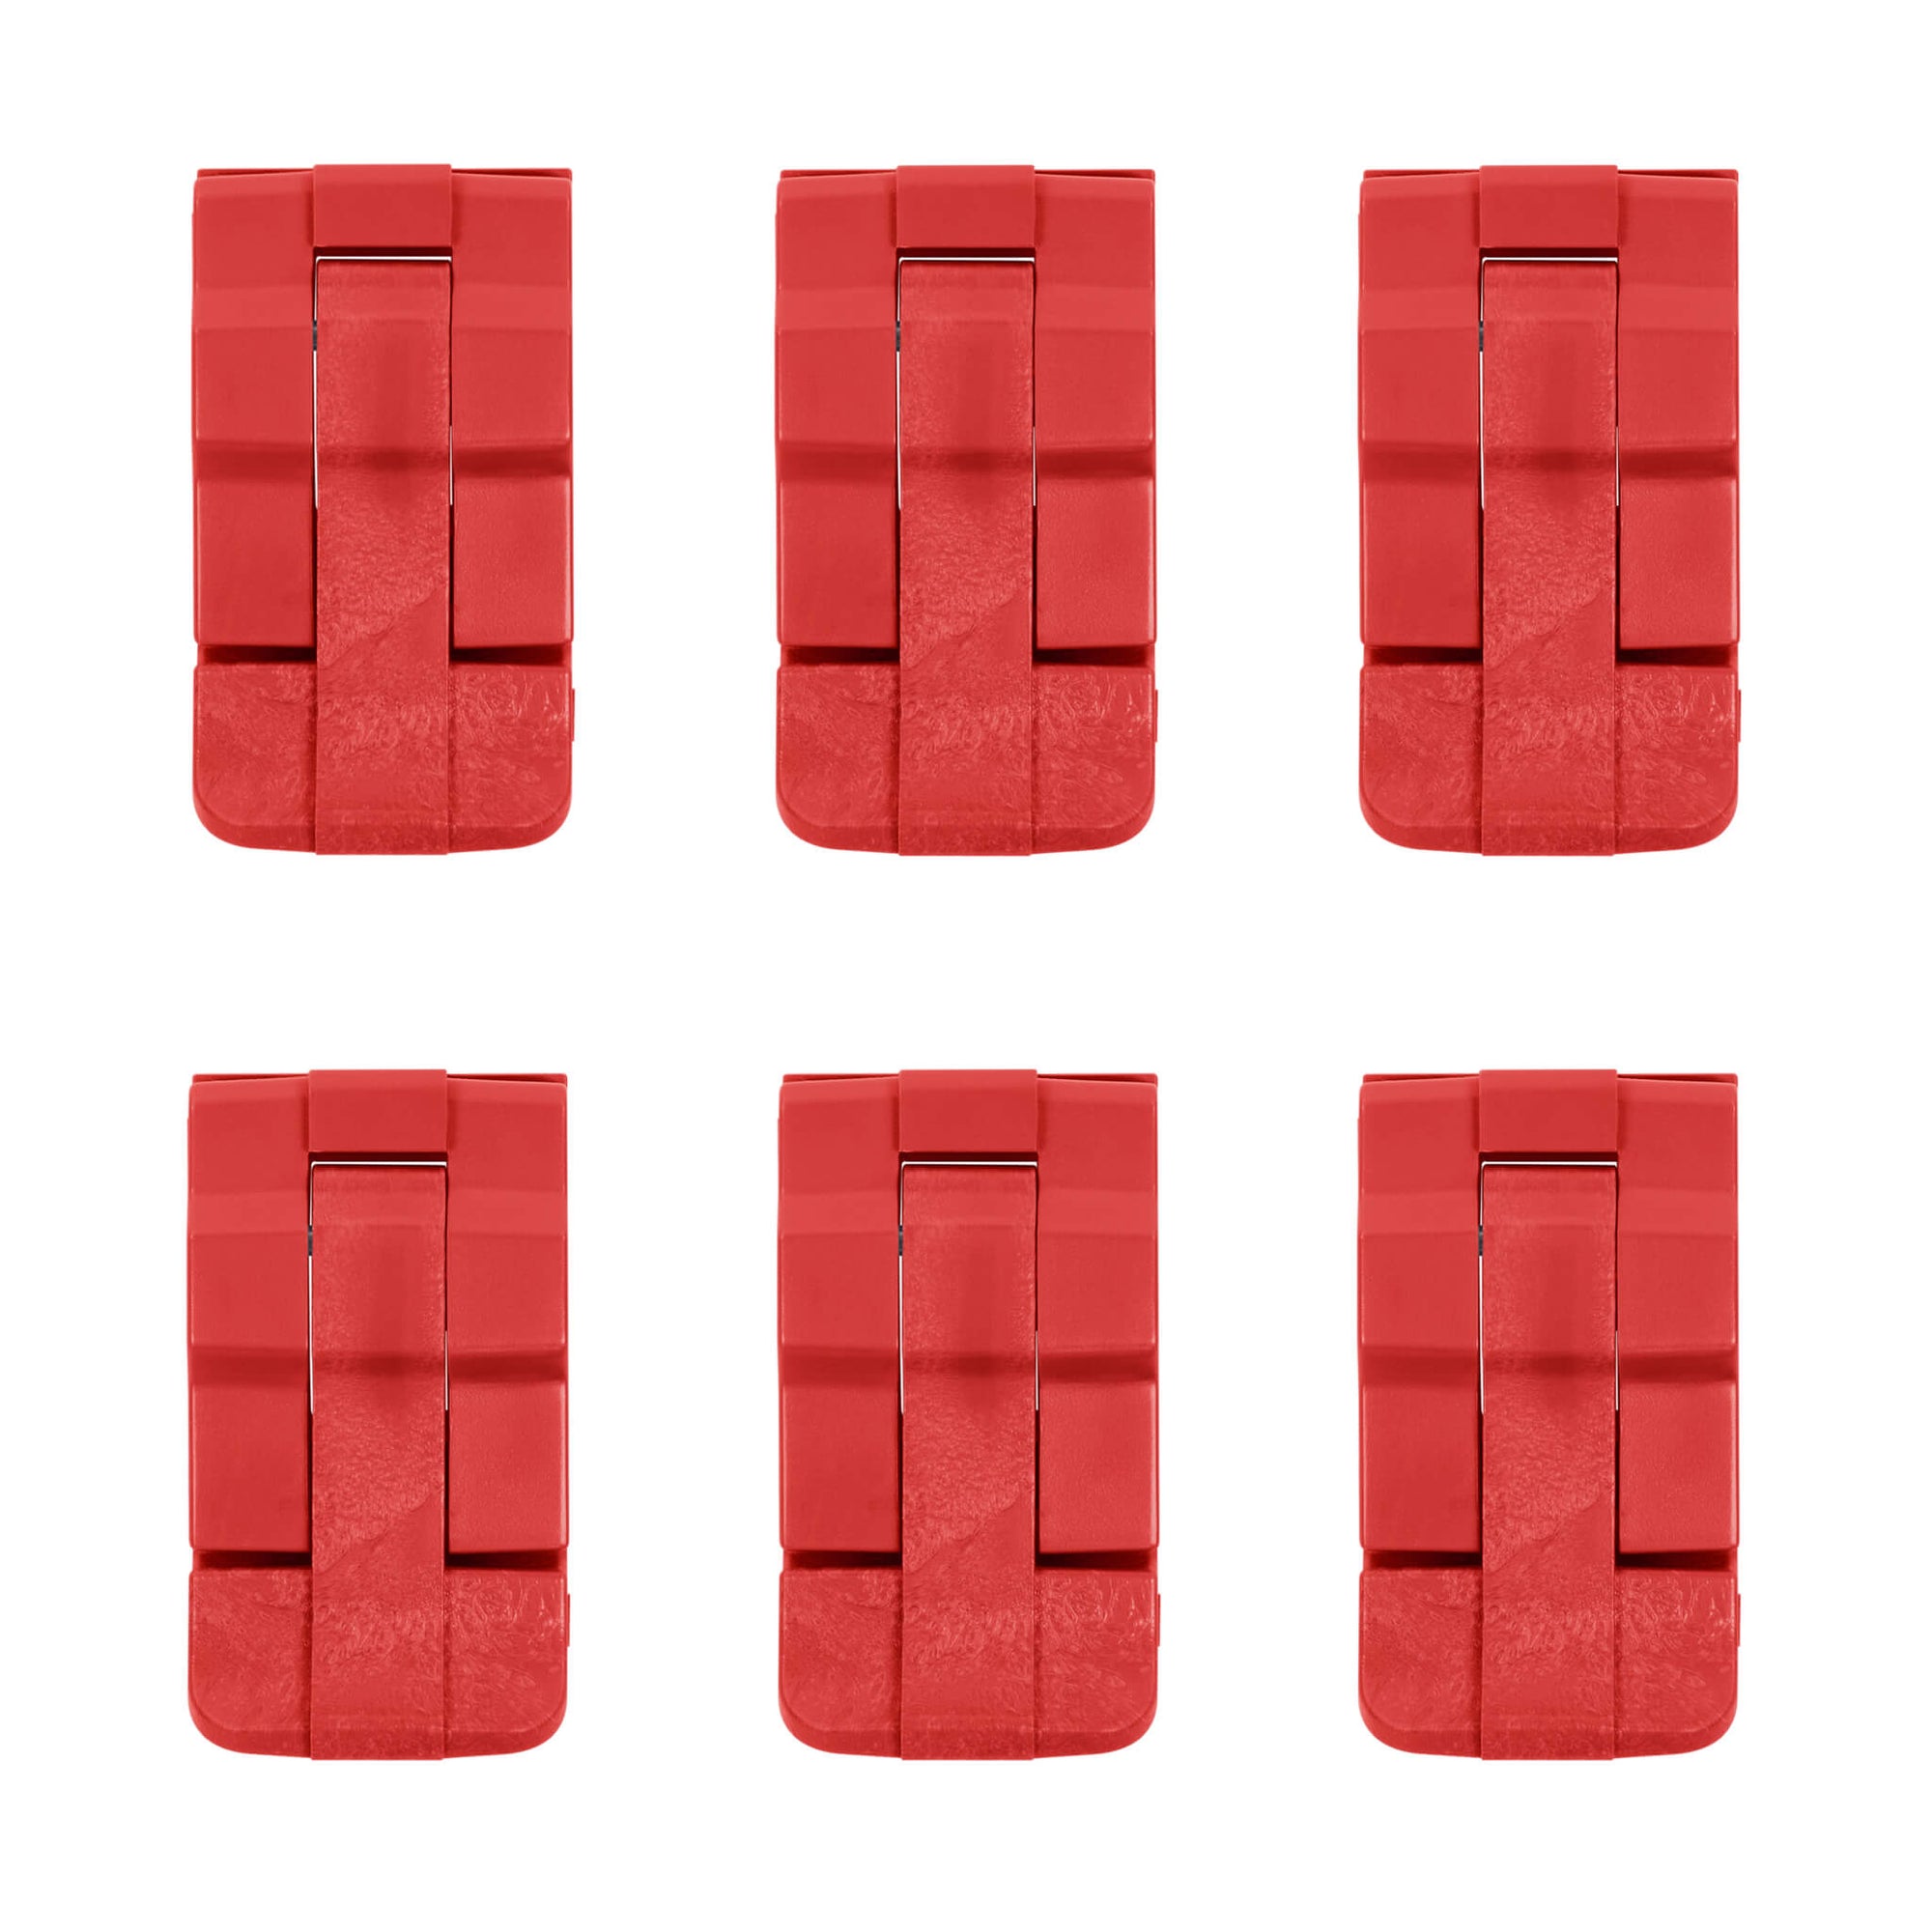 Pelican 0350 Replacement Latches, Red (Set of 6) ColorCase 